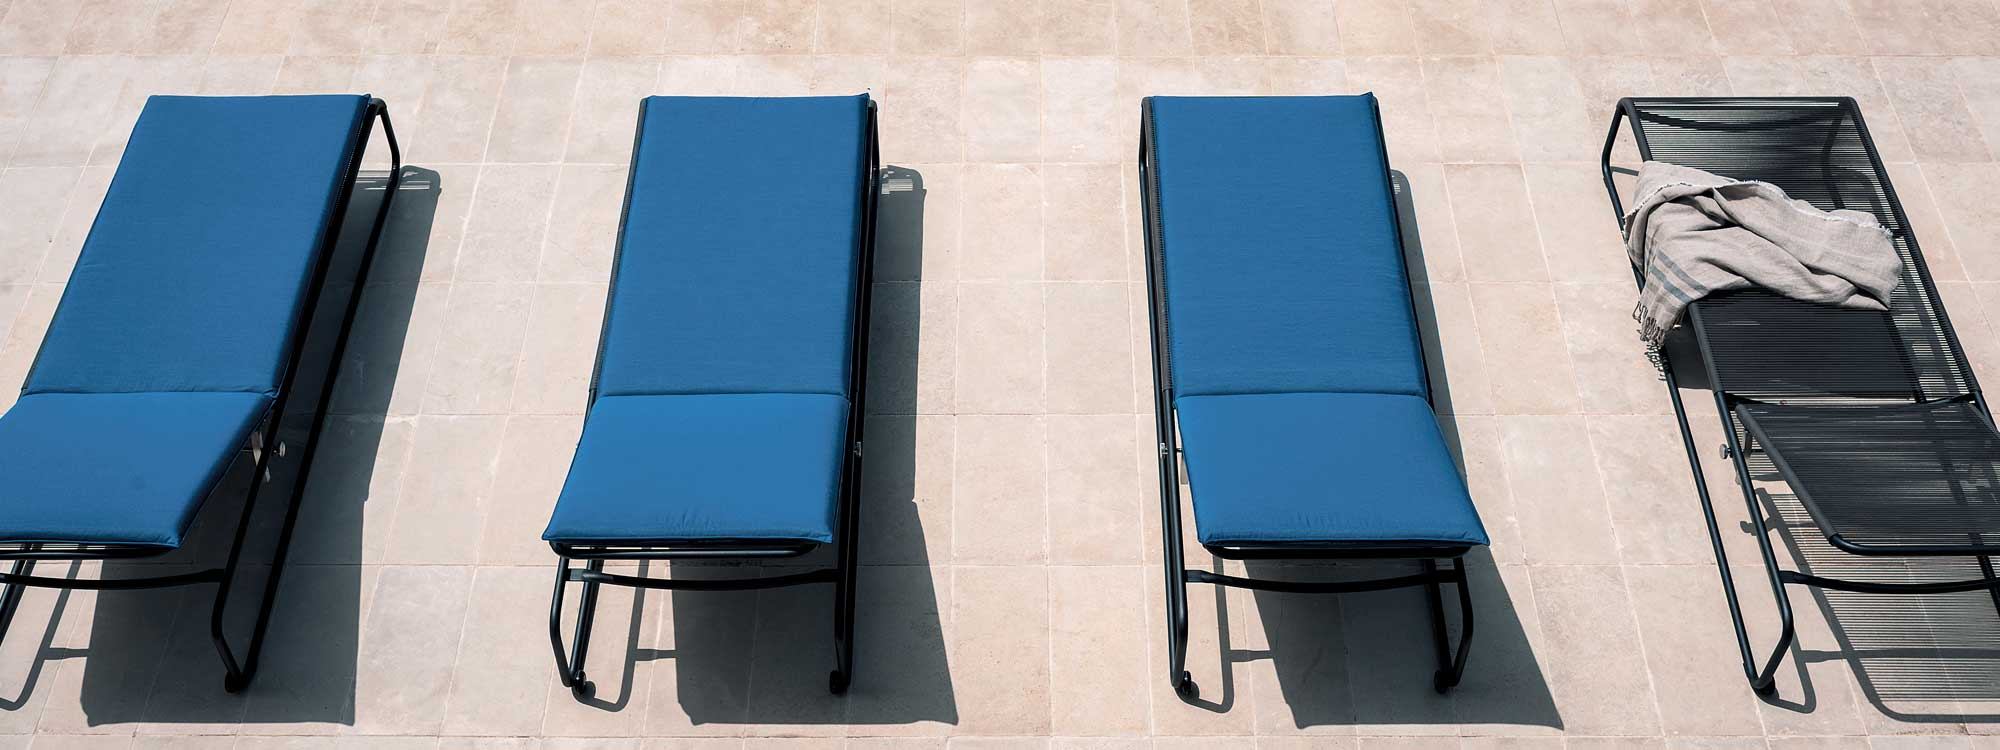 Row of Harp modern sun lounger is a designer sunbed in highest quality outdoor furniture materials by Roda luxury Italian garden furniture company.